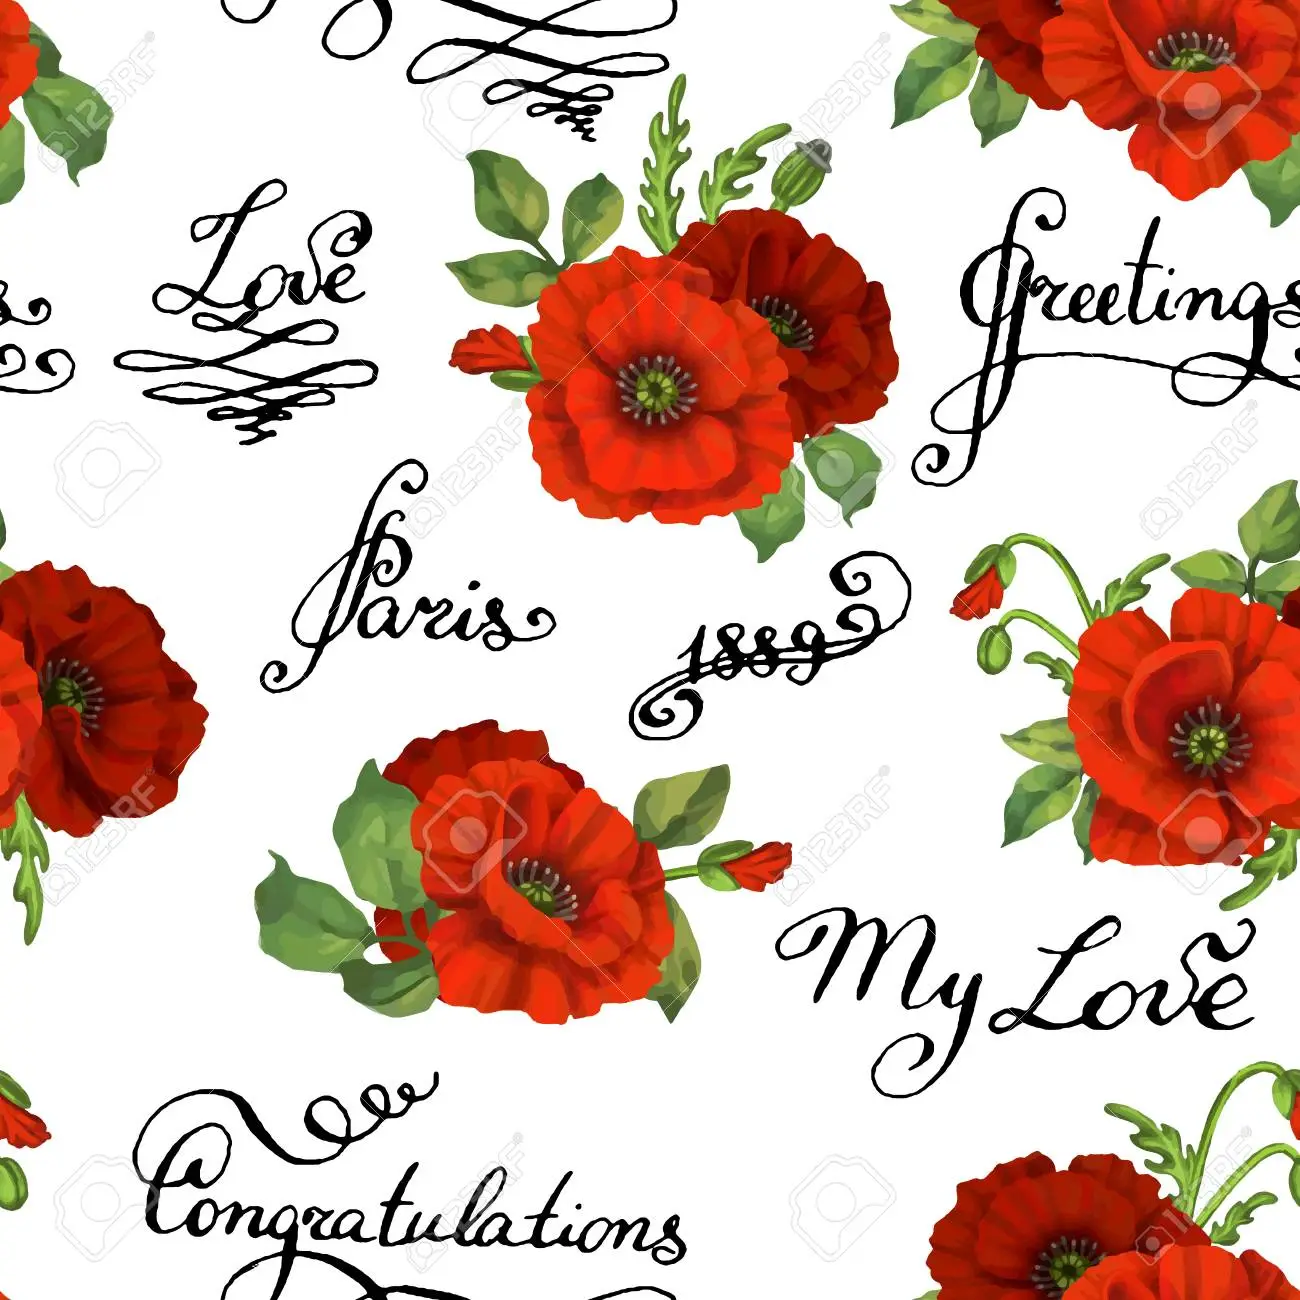 Seamless floral pattern with words flower vector illustration elegance wallpaper with poppy on floral background decorative vintage vector illustration texture shabby chic poppy hand write words royalty free svg cliparts vectors and